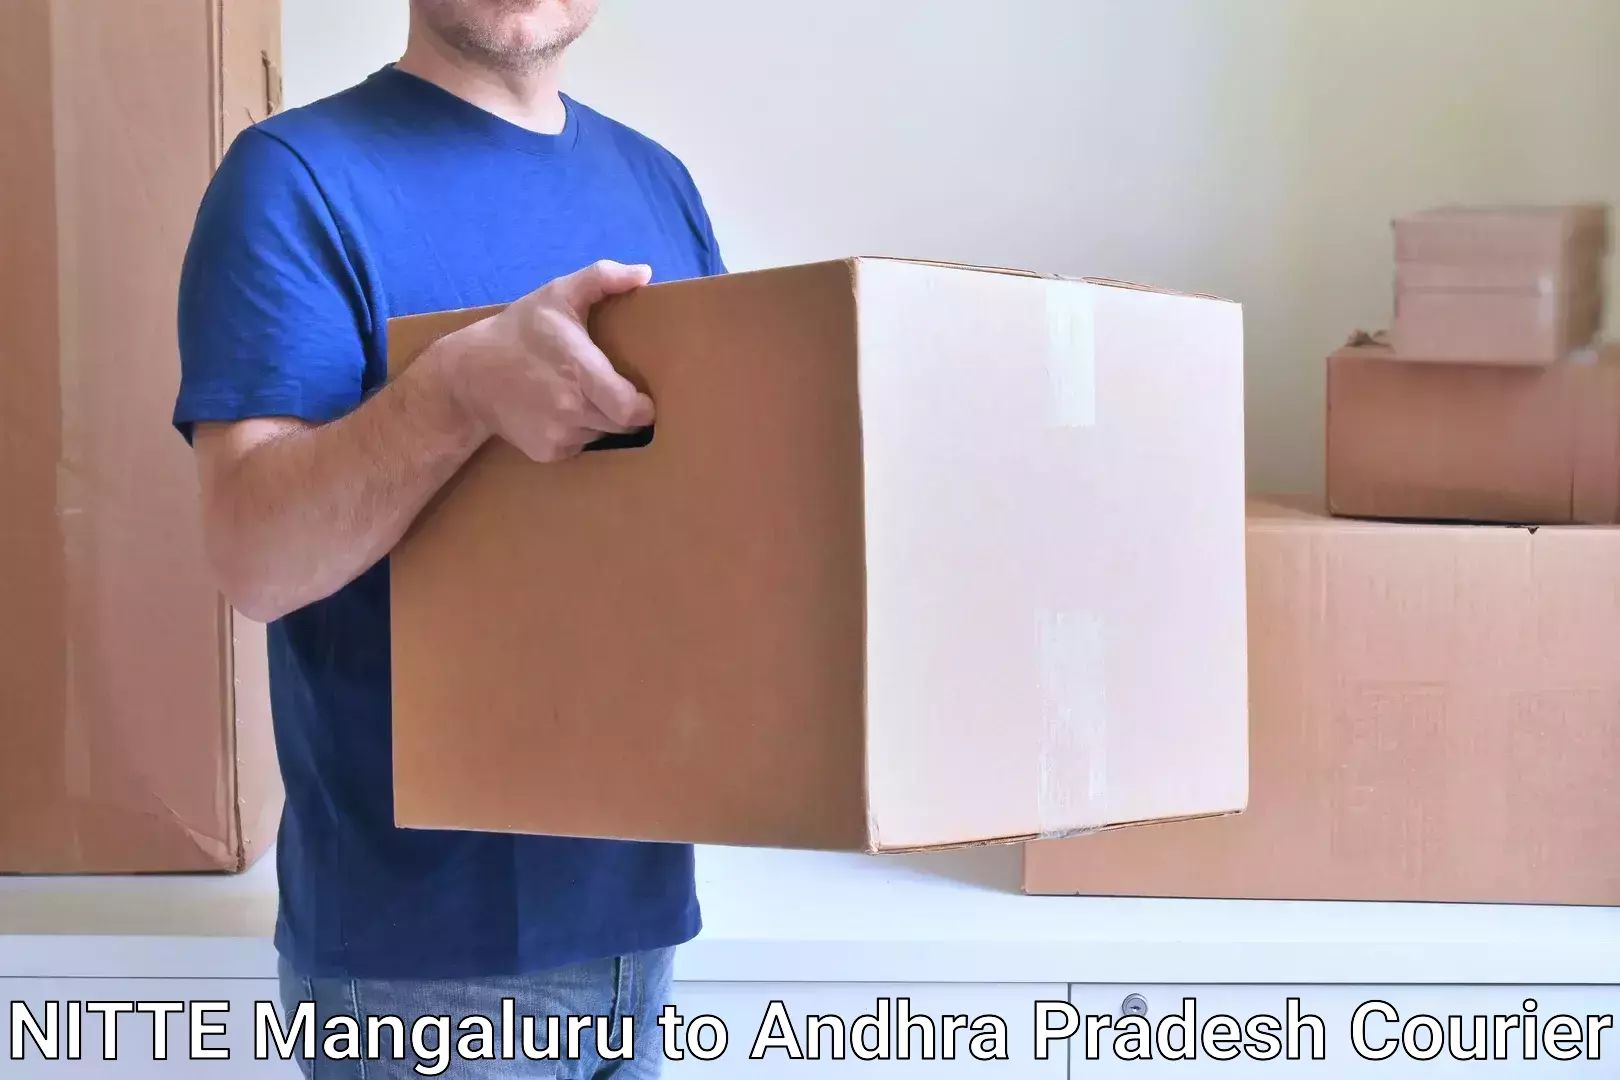 Express delivery solutions NITTE Mangaluru to Sri City